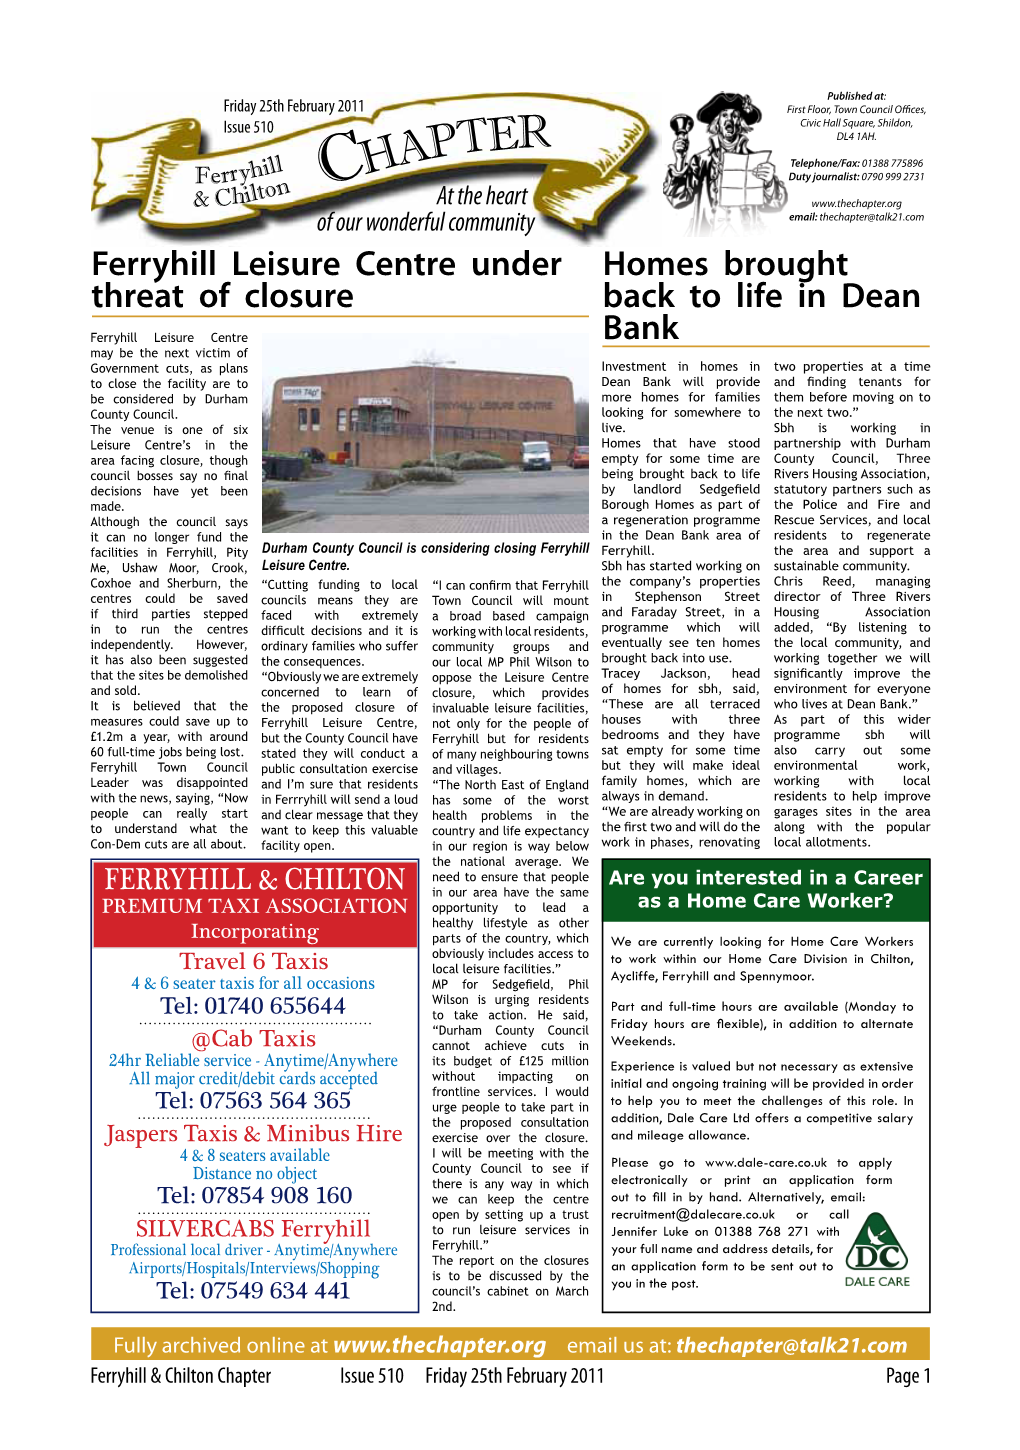 Chapter.Org of Our Wonderful Community Email: Thechapter@Talk21.Com Ferryhill Leisure Centre Under Homes Brought Threat of Closure Back to Life in Dean